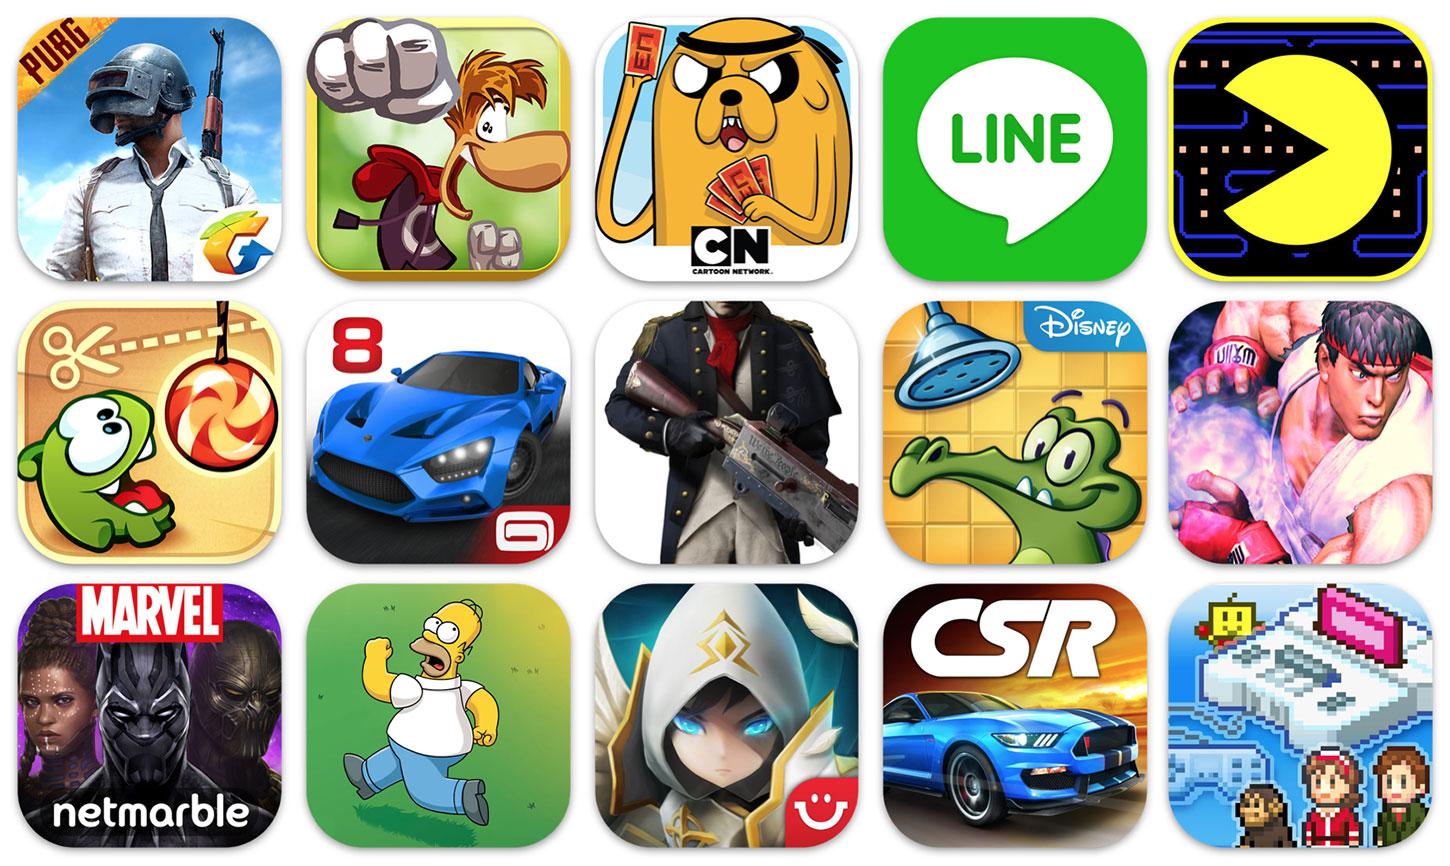 Icons of selected apps that belong to publishers who have reached reached No. 1 on one of the App Store iPhone charts